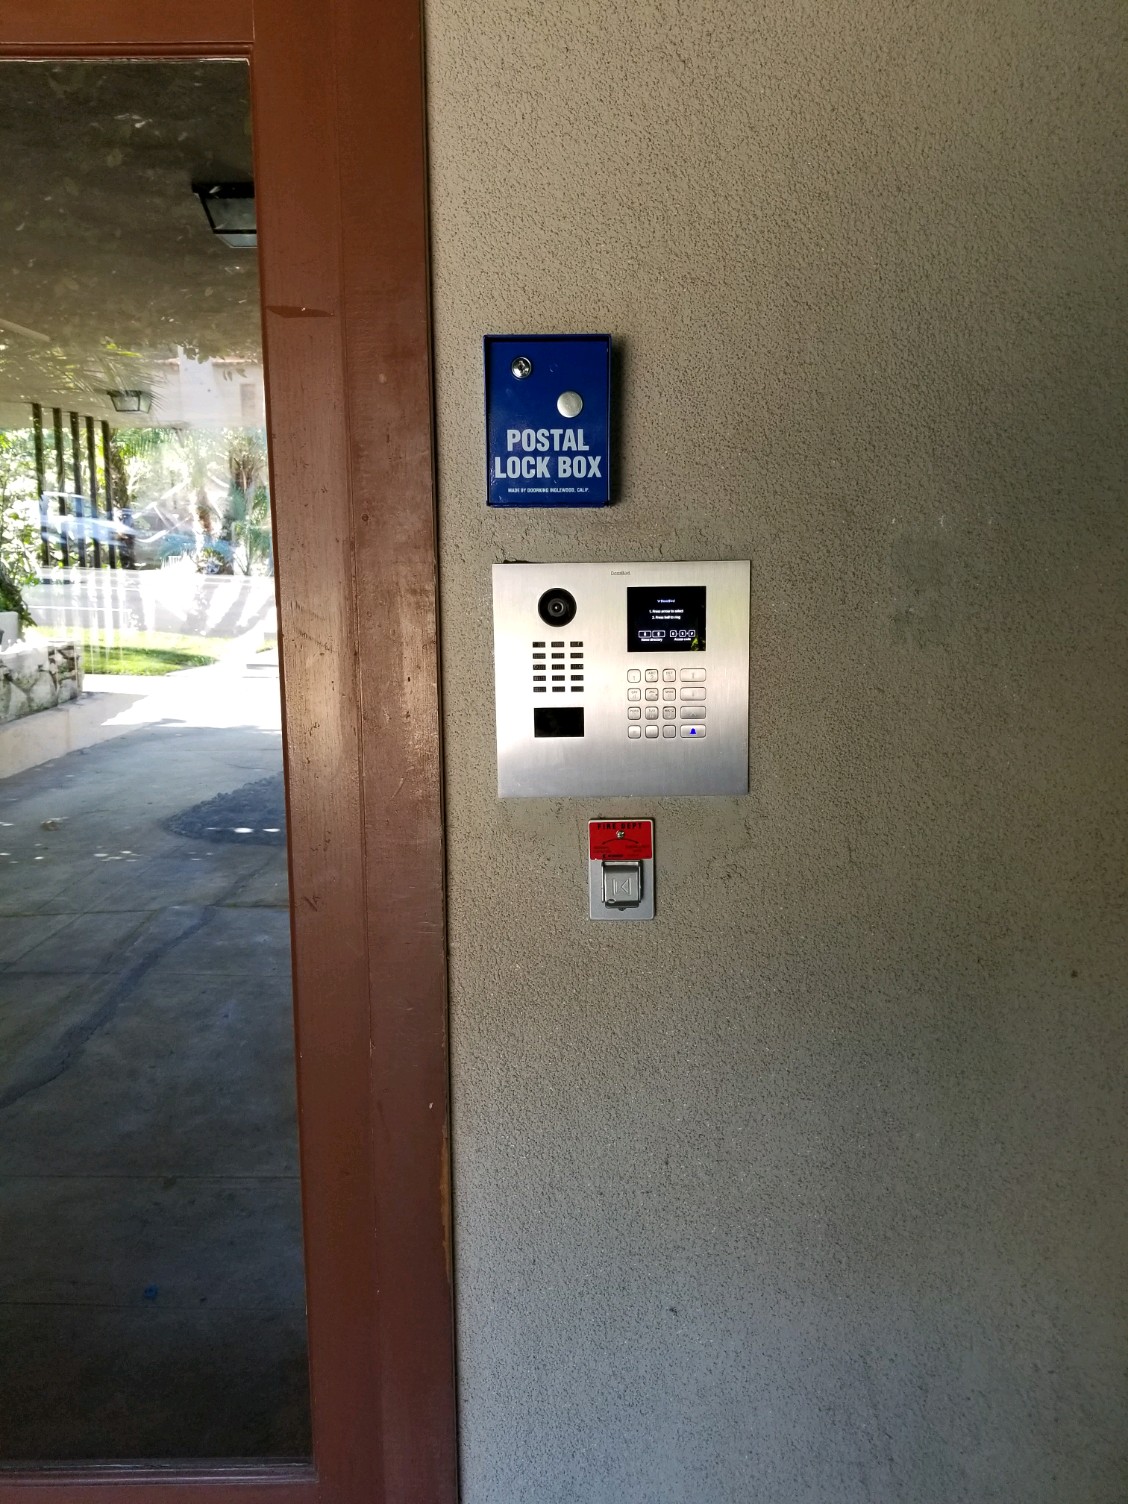 Intercom Systems For Homes Los Angeles- Onboard IT Tech